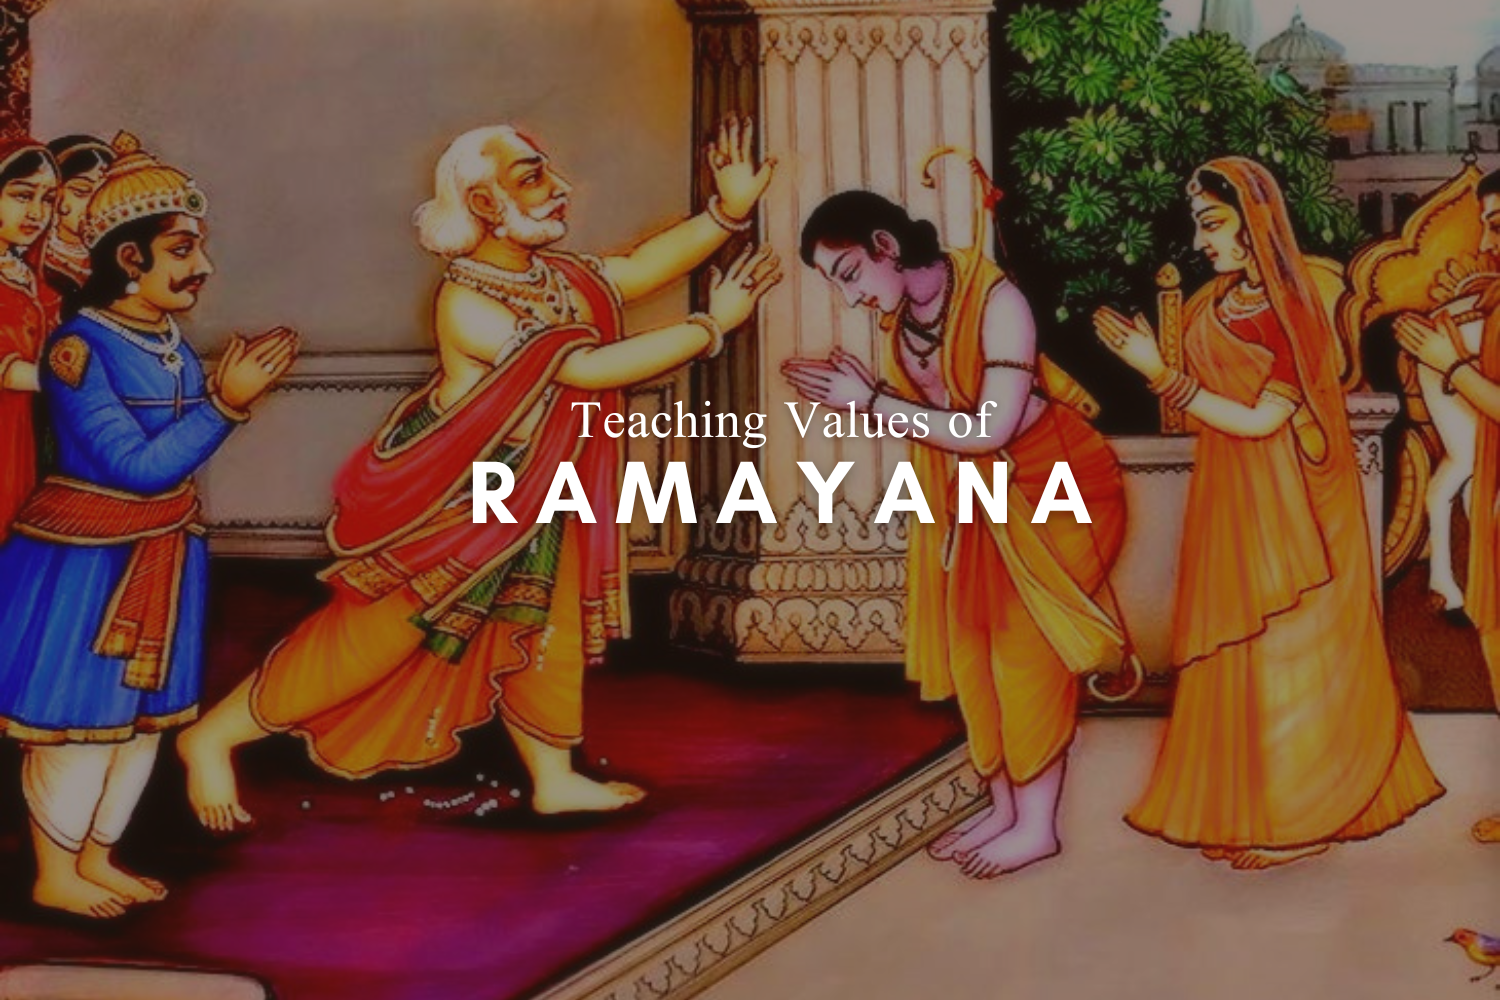 Unraveling the Timeless Wisdom: Teaching Values of the Ramayana